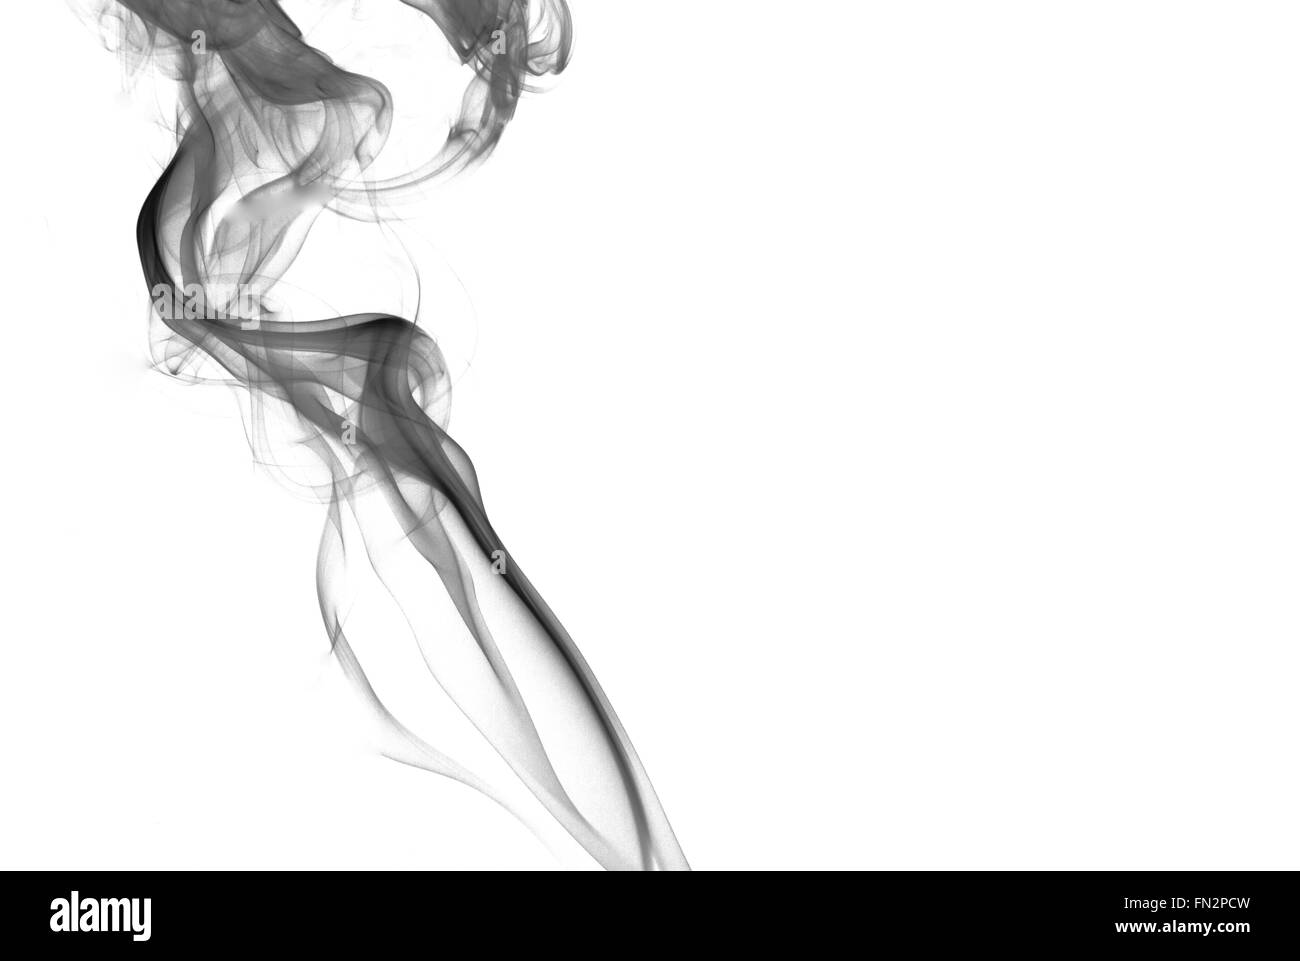 A thick streak of black, grainy smoke isolated on white background with the effect of the graphic as an abstract background, Stock Photo